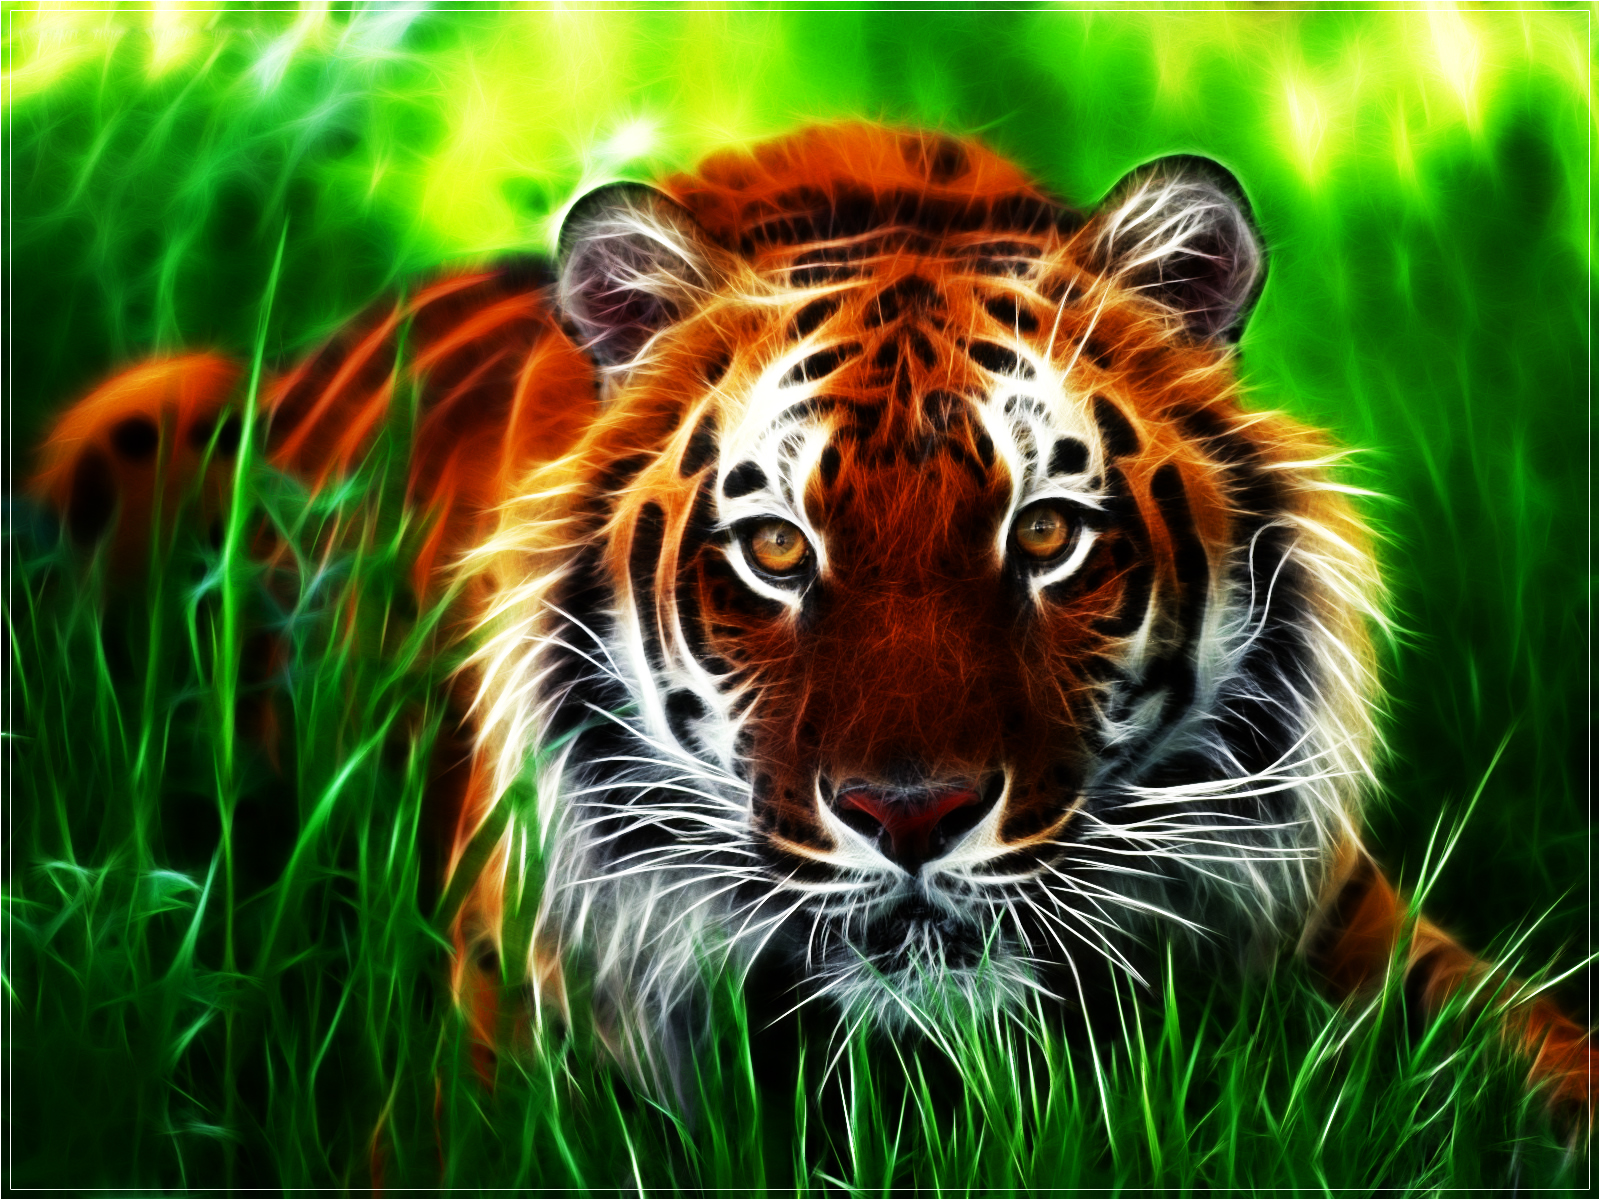 Get the best size of Tiger Wallpaper and Desktop tiger wallpapers here